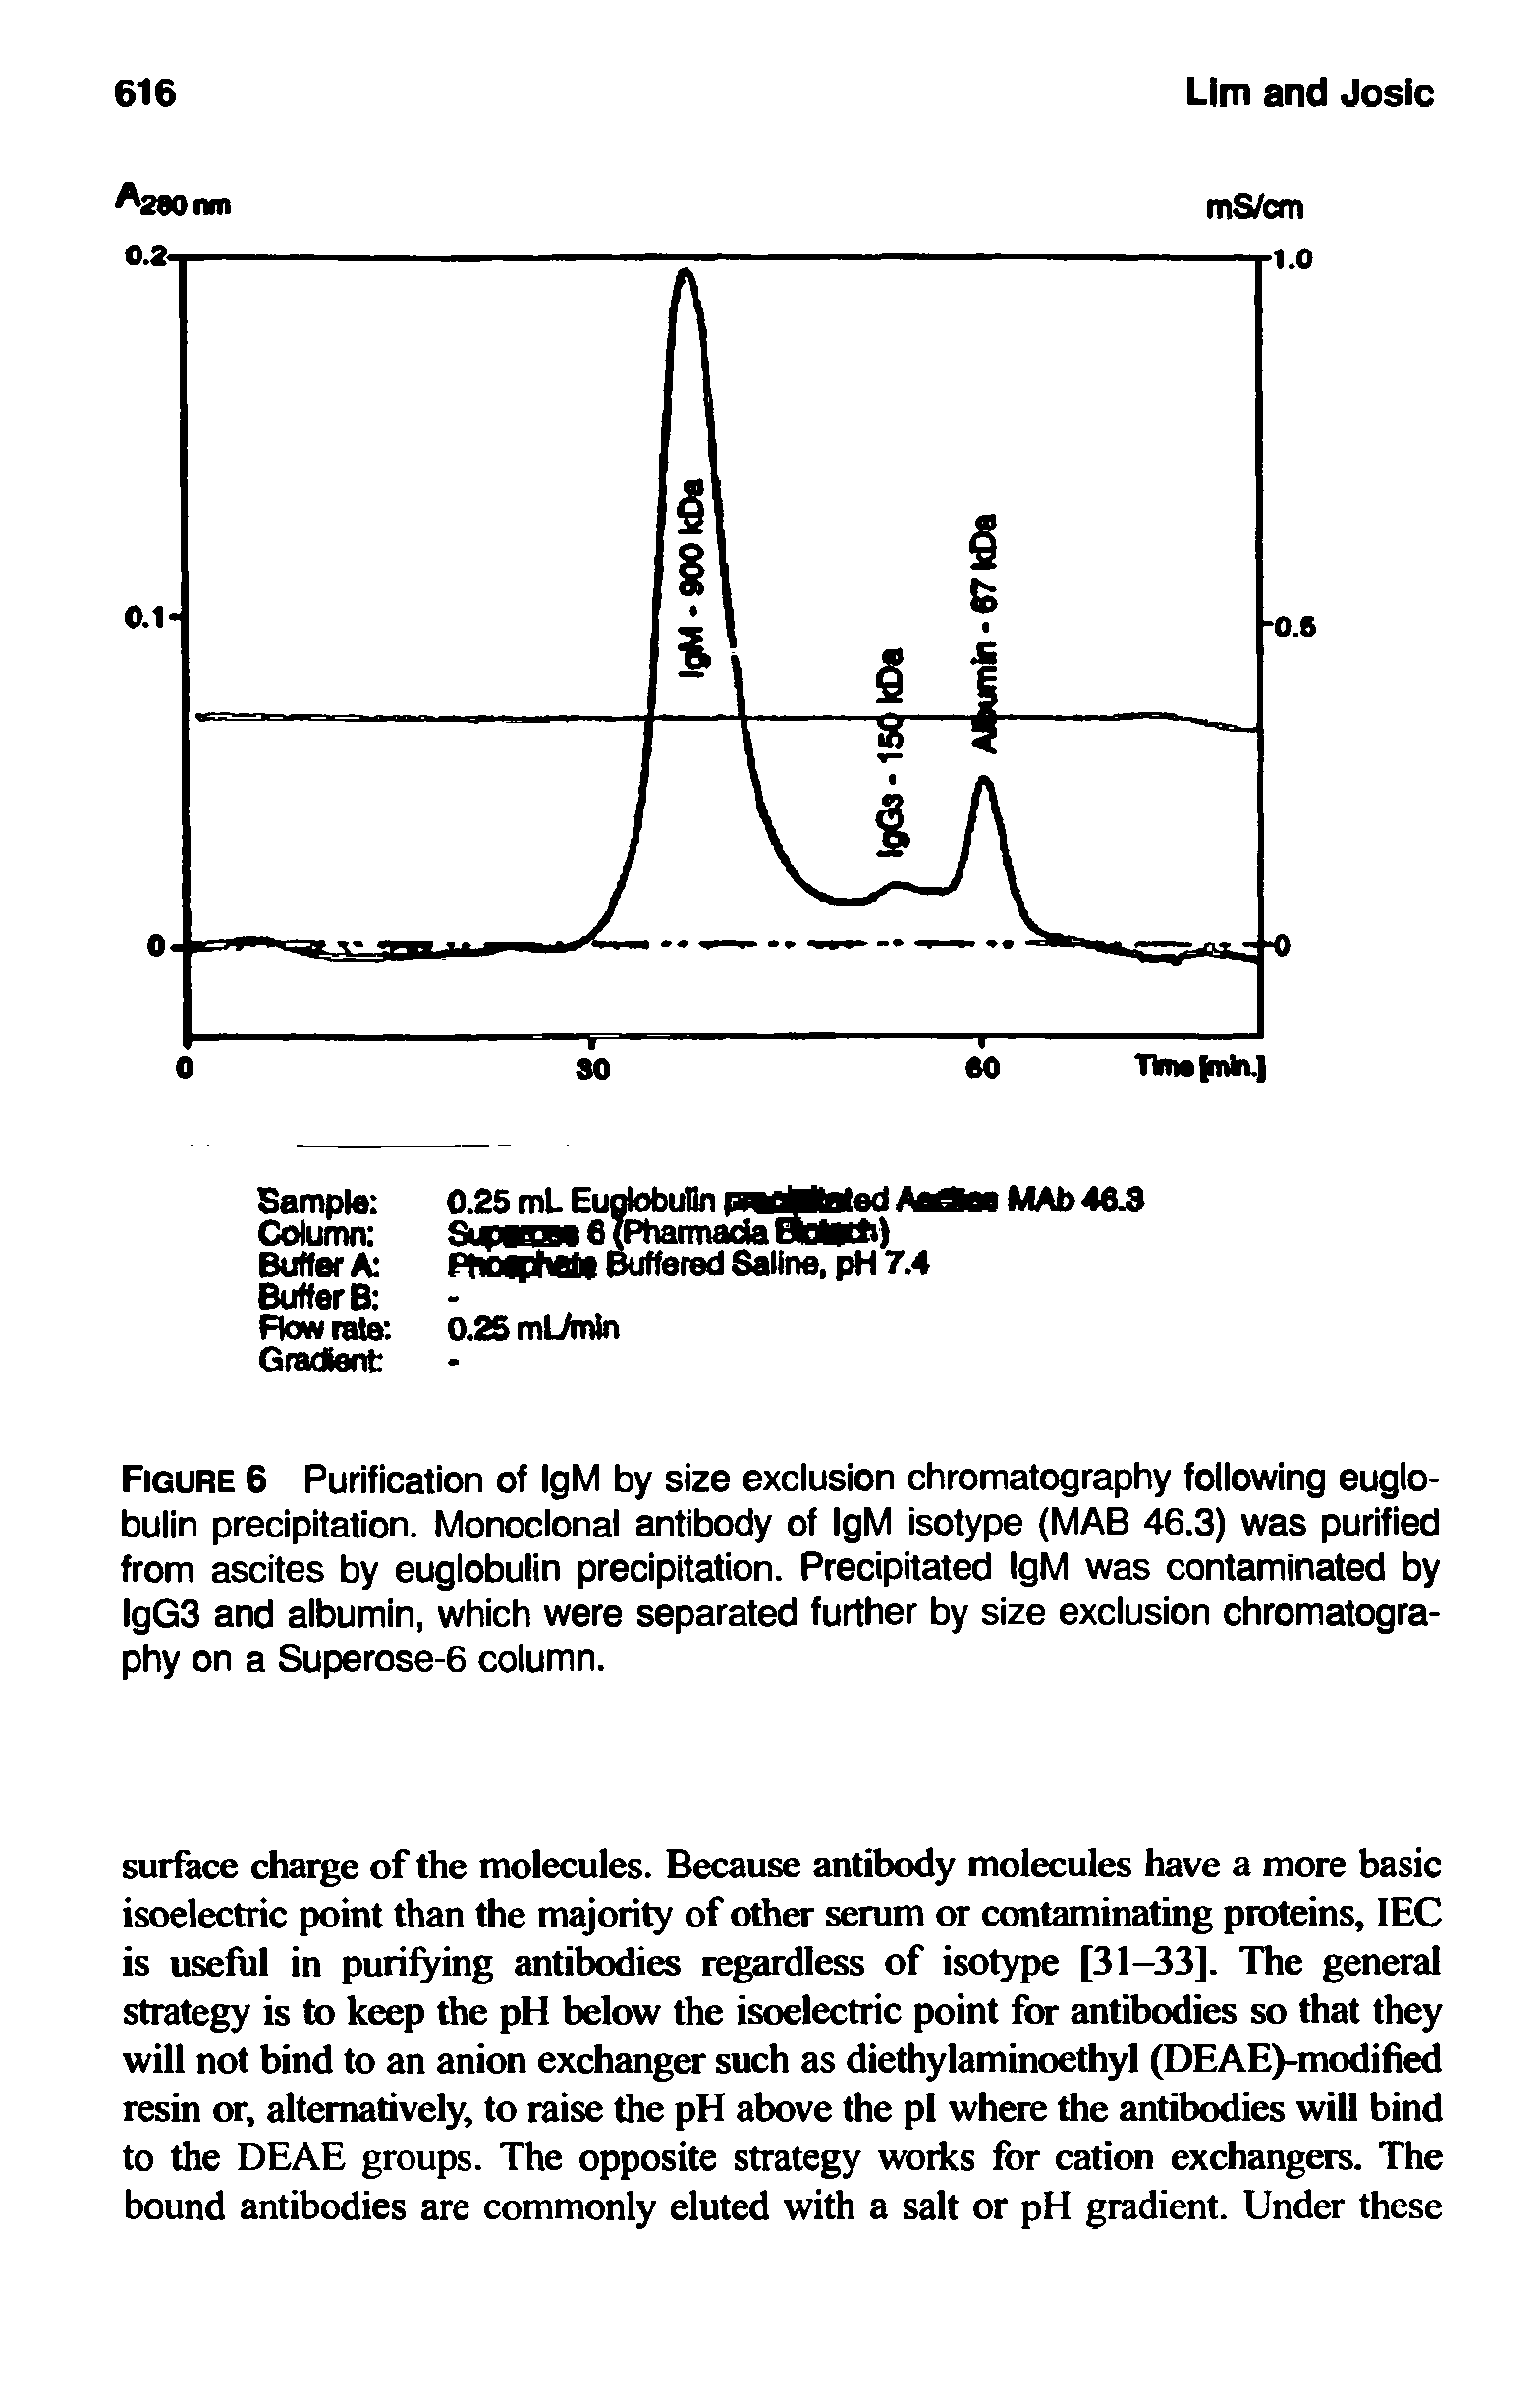 Figure 6 Purification of IgM by size exciusion chromatography foliowing euglobulin precipitation. Monoclonal antibody of IgM isotype (MAB 46.3) was purified from ascites by euglobulin precipitation. Precipitated IgM was contaminated by lgG3 and albumin, which were separated further by size exclusion chromatography on a Superose-6 column.